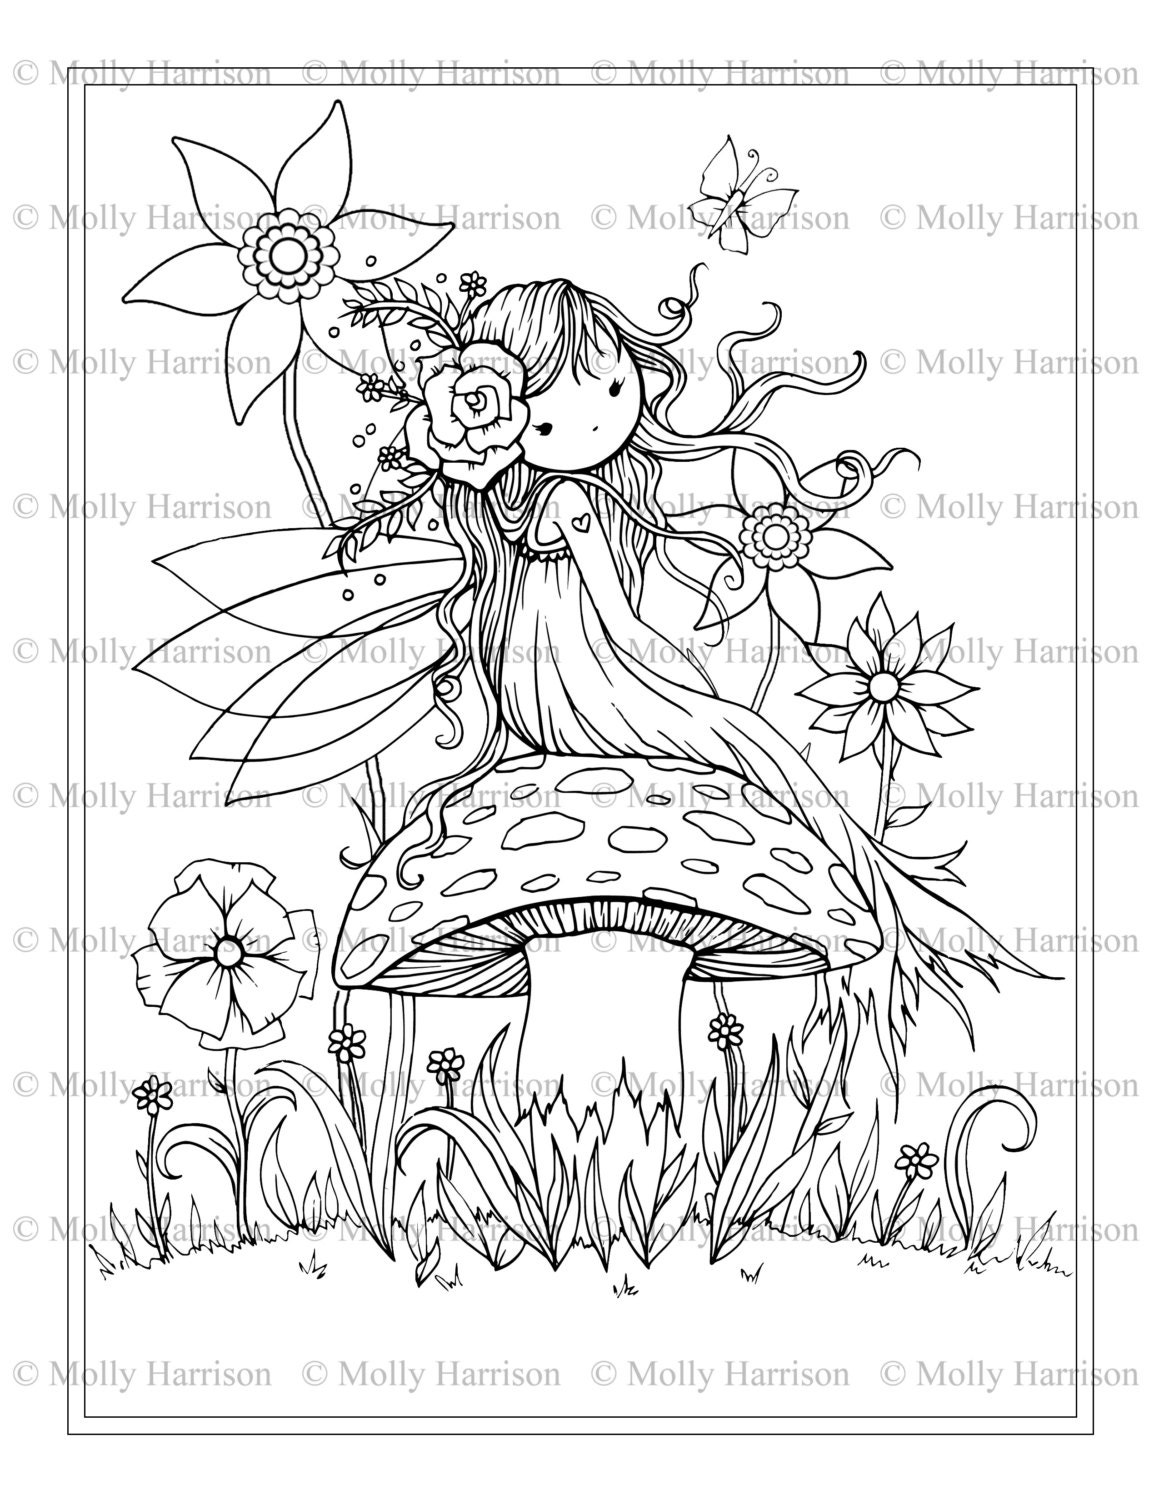 Download Fairy Sitting on Mushroom Printable Coloring Page | Etsy